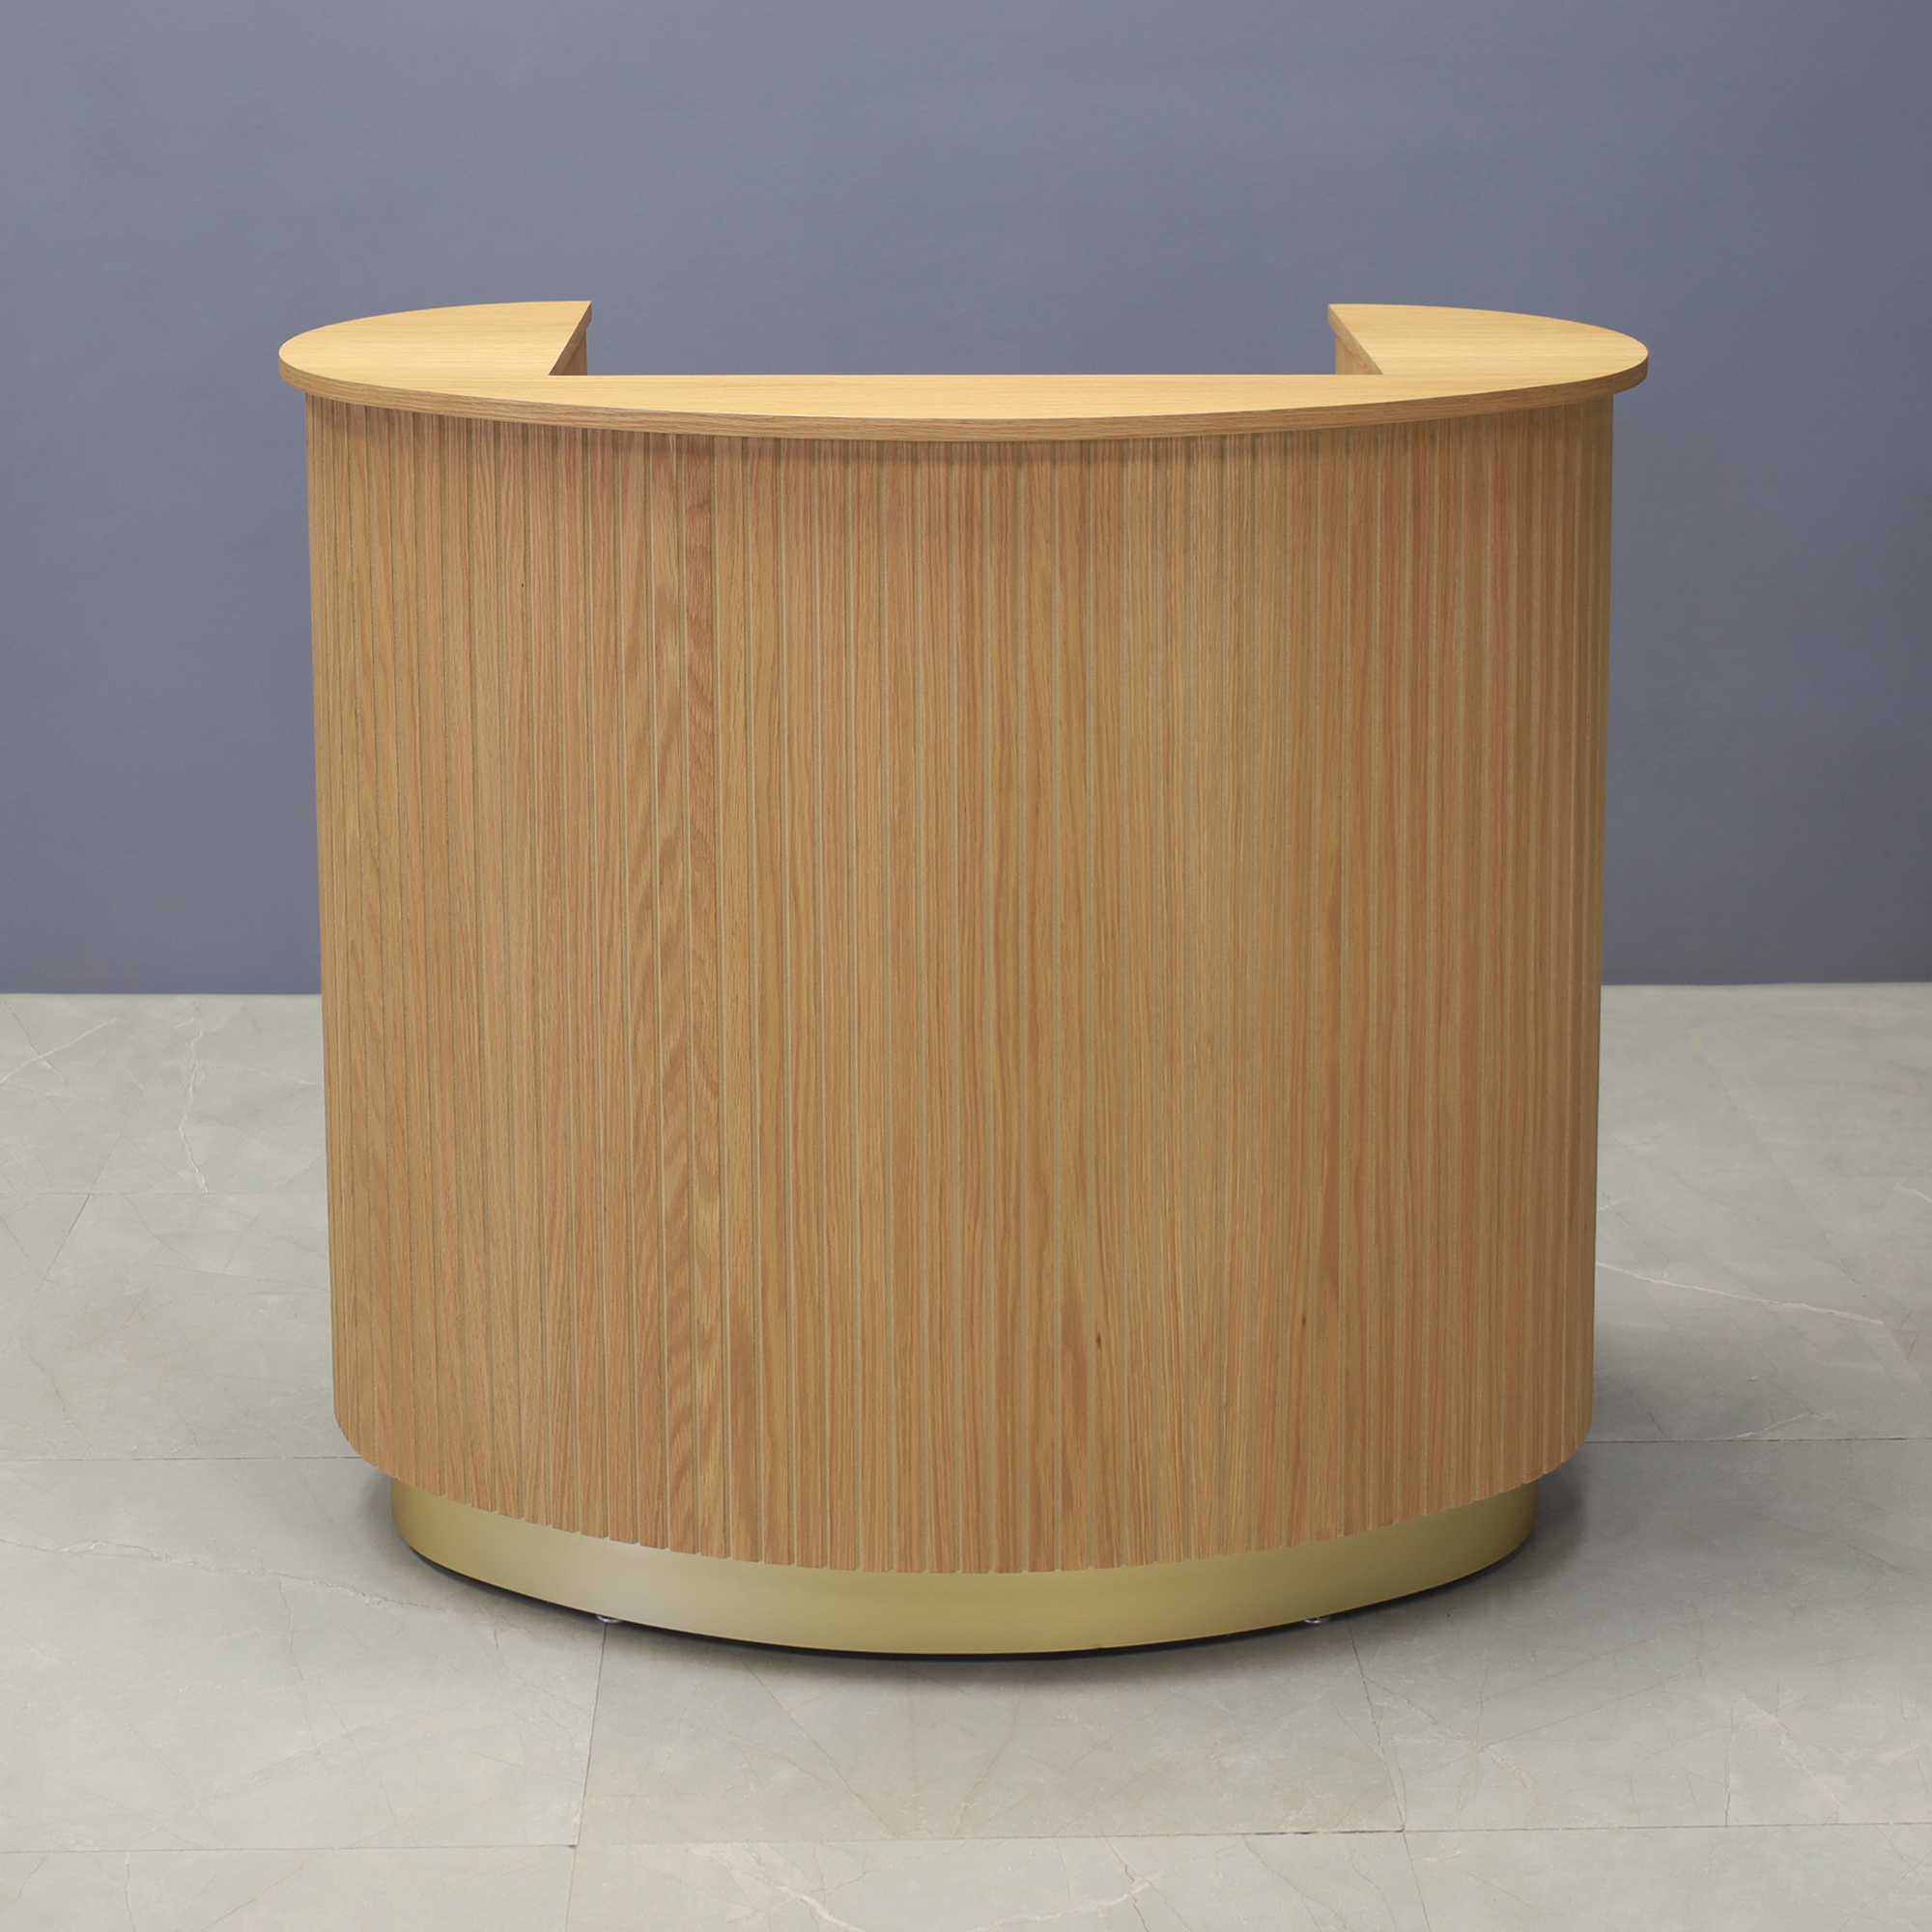 48-inch The Pill Podium & Host Custom Desk in white oak veneer top, front desk and workspace, with gold aluminum toe-kick, shown here.